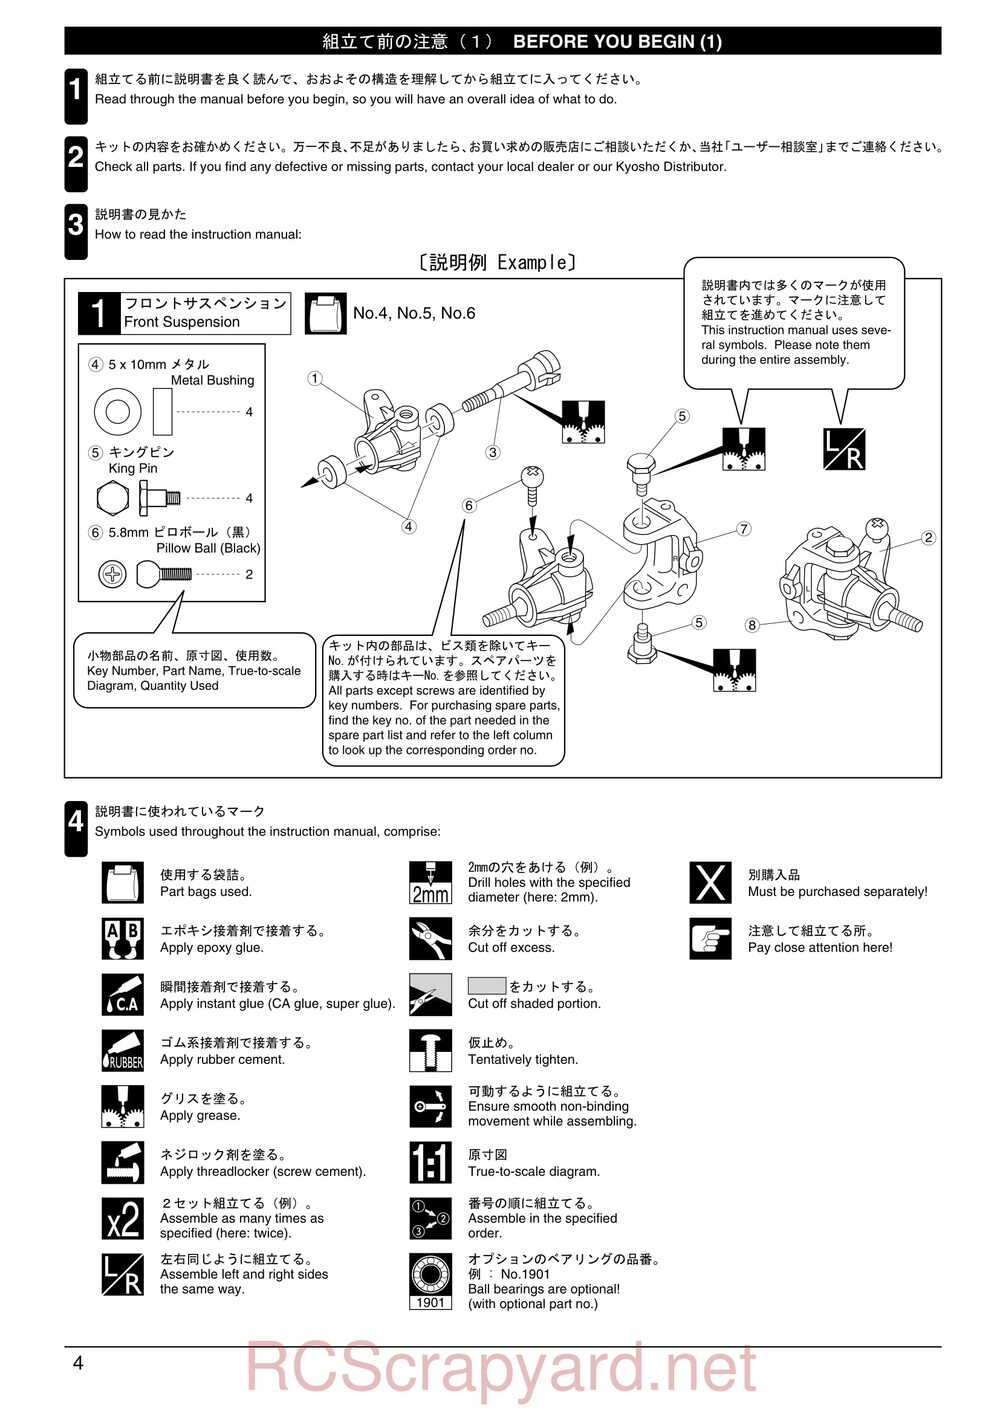 Kyosho - 31061 - TR-15 Rally - Manual - Page 04